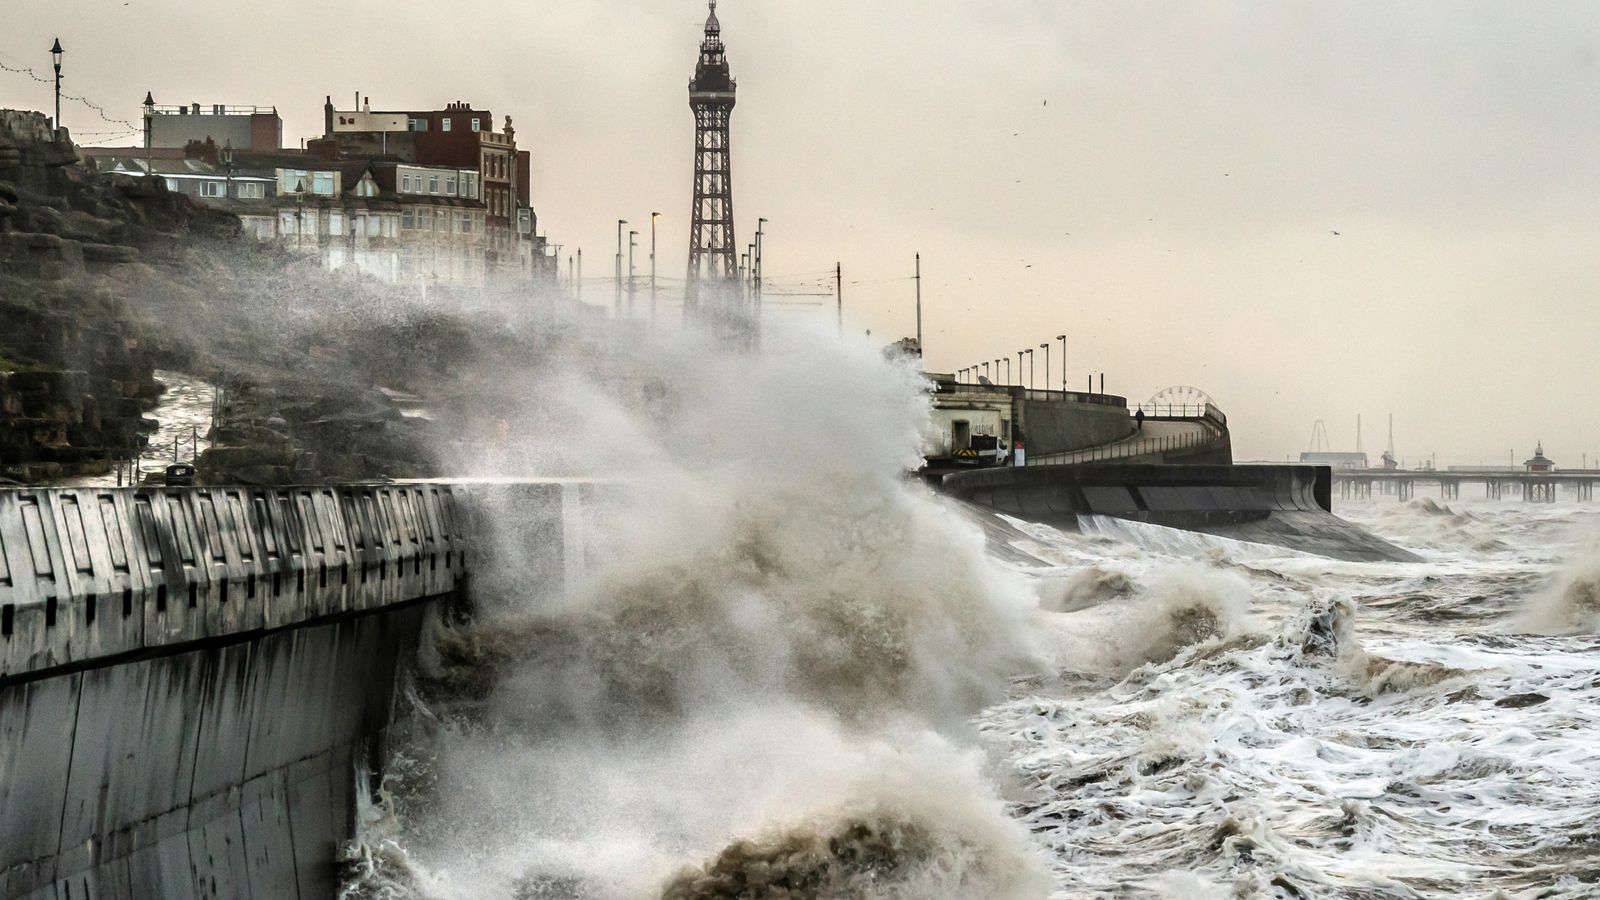 UK weather: Why have there been so many storms this year and could more be on the way?